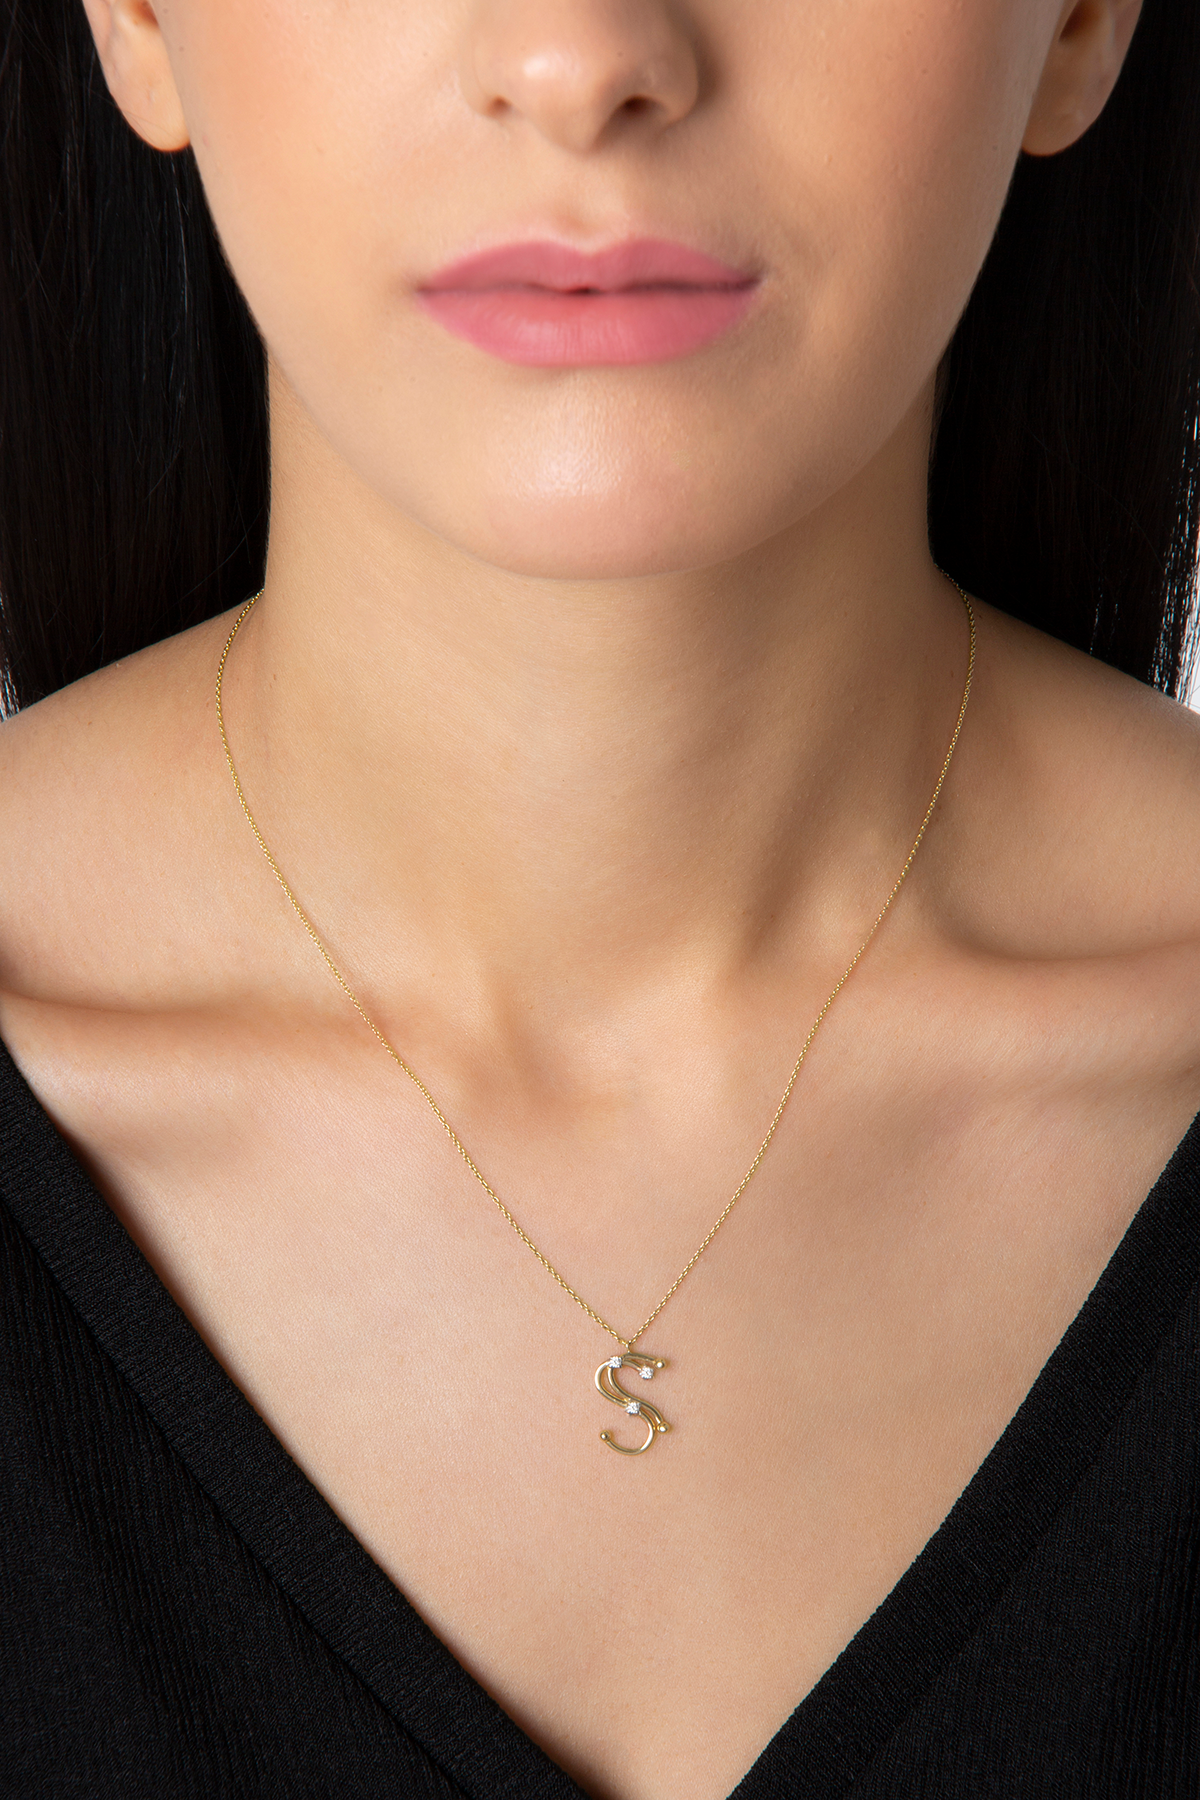 Galactic Necklace Initials in Yellow Gold - Her Story Shop